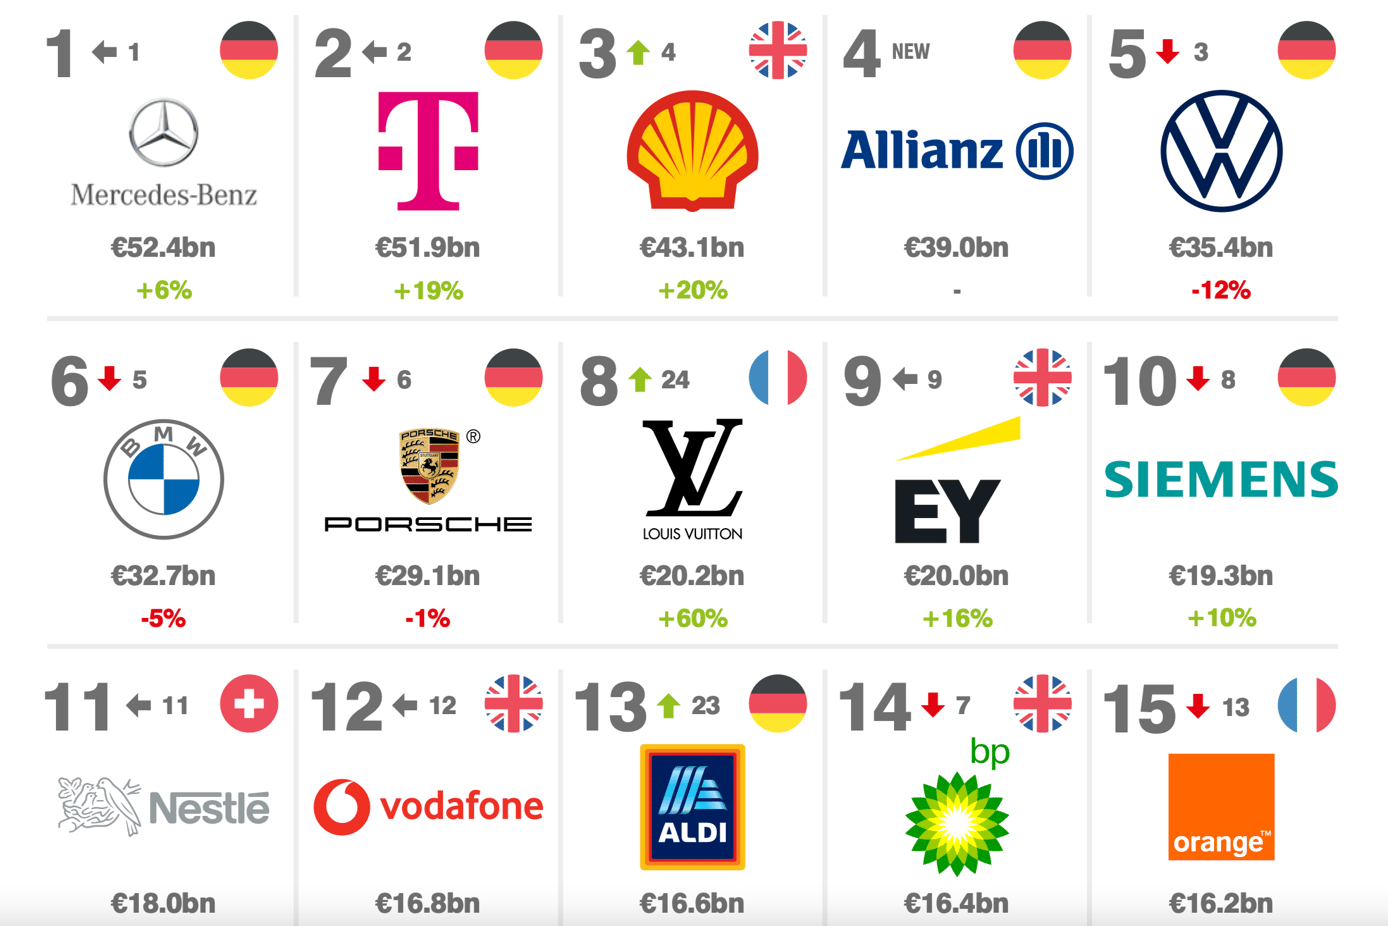 Louis Vuitton in Top 10 of Europe's most valuable brands